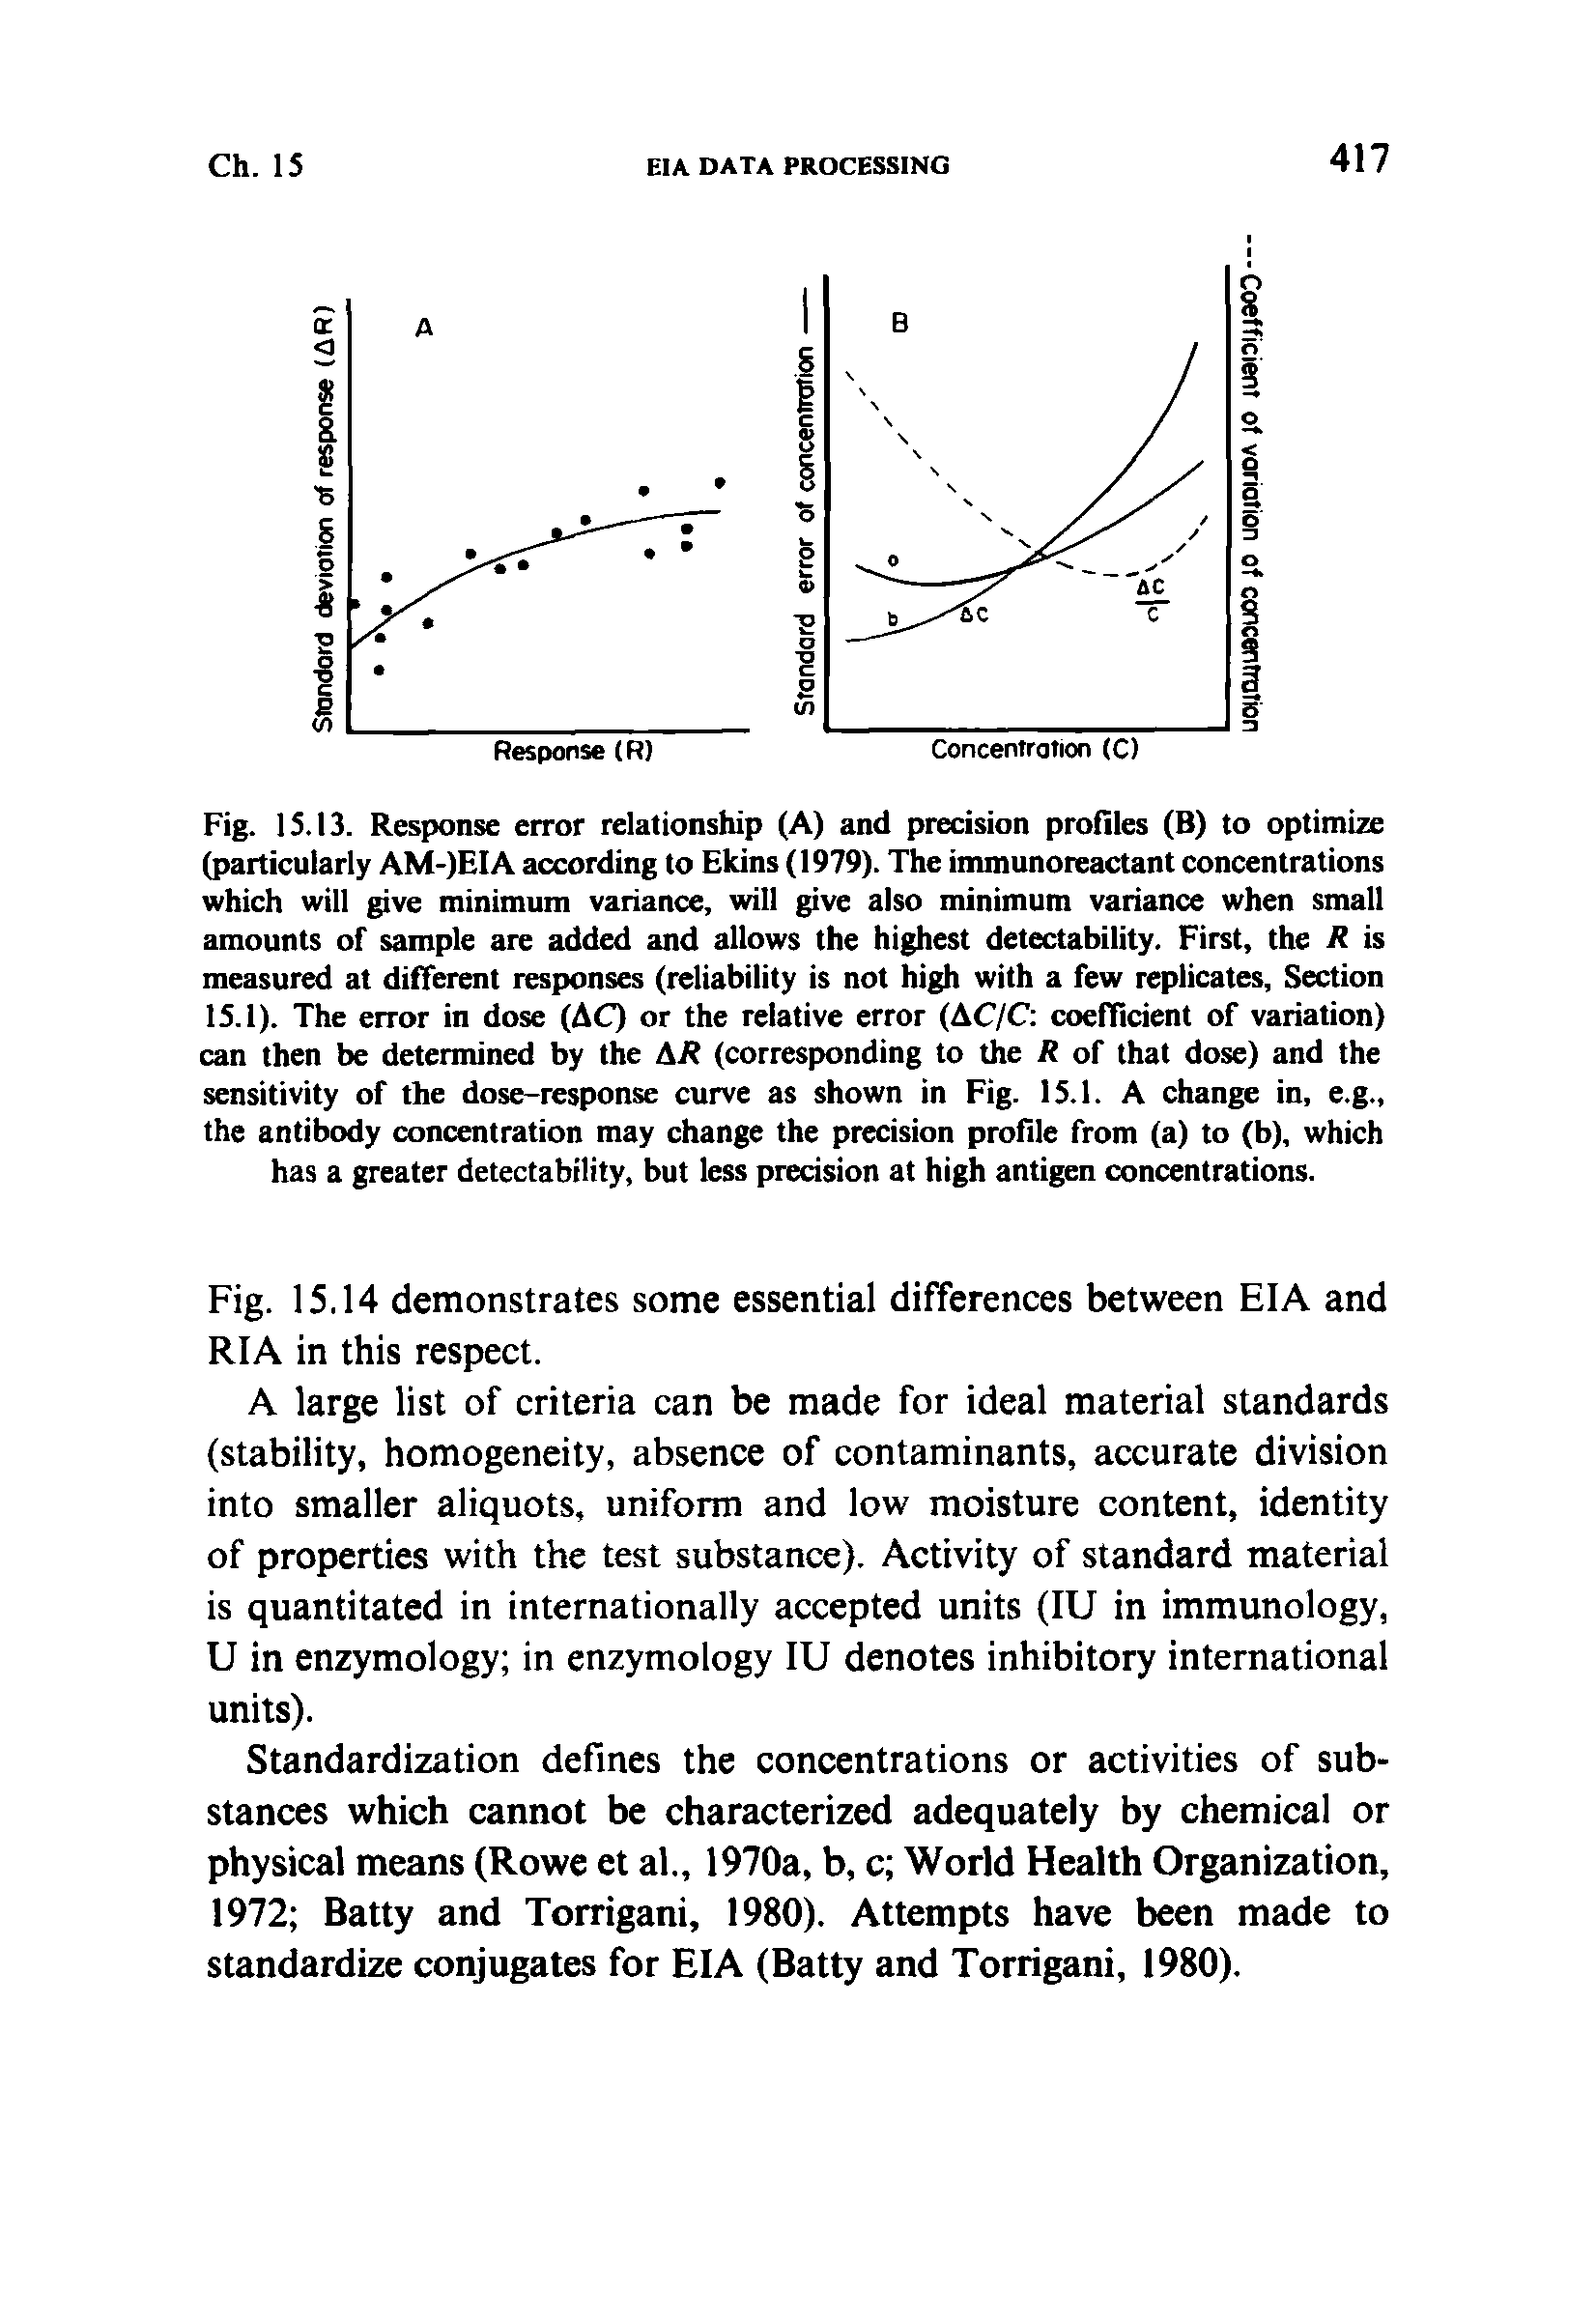 Fig. 15.13. Response error relationship (A) and precision profiles (B) to optimize (particularly AM-)EIA according to Ekins (1979). The immunoreactant concentrations which will give minimum variance, will give also minimum variance when small amounts of sample are added and allows the highest detectability. First, the R is measured at different responses (reliability is not high with a few replicates. Section 15.1). The error in dose (AC) or the relative error (AC/C coefficient of variation) can then be determined by the AR (corresponding to the R of that dose) and the sensitivity of the dose-response curve as shown in Fig. 15.1. A change in, e.g., the antibody concentration may change the precision profile from (a) to (b), which has a greater detectability, but less precision at high antigen concentrations.